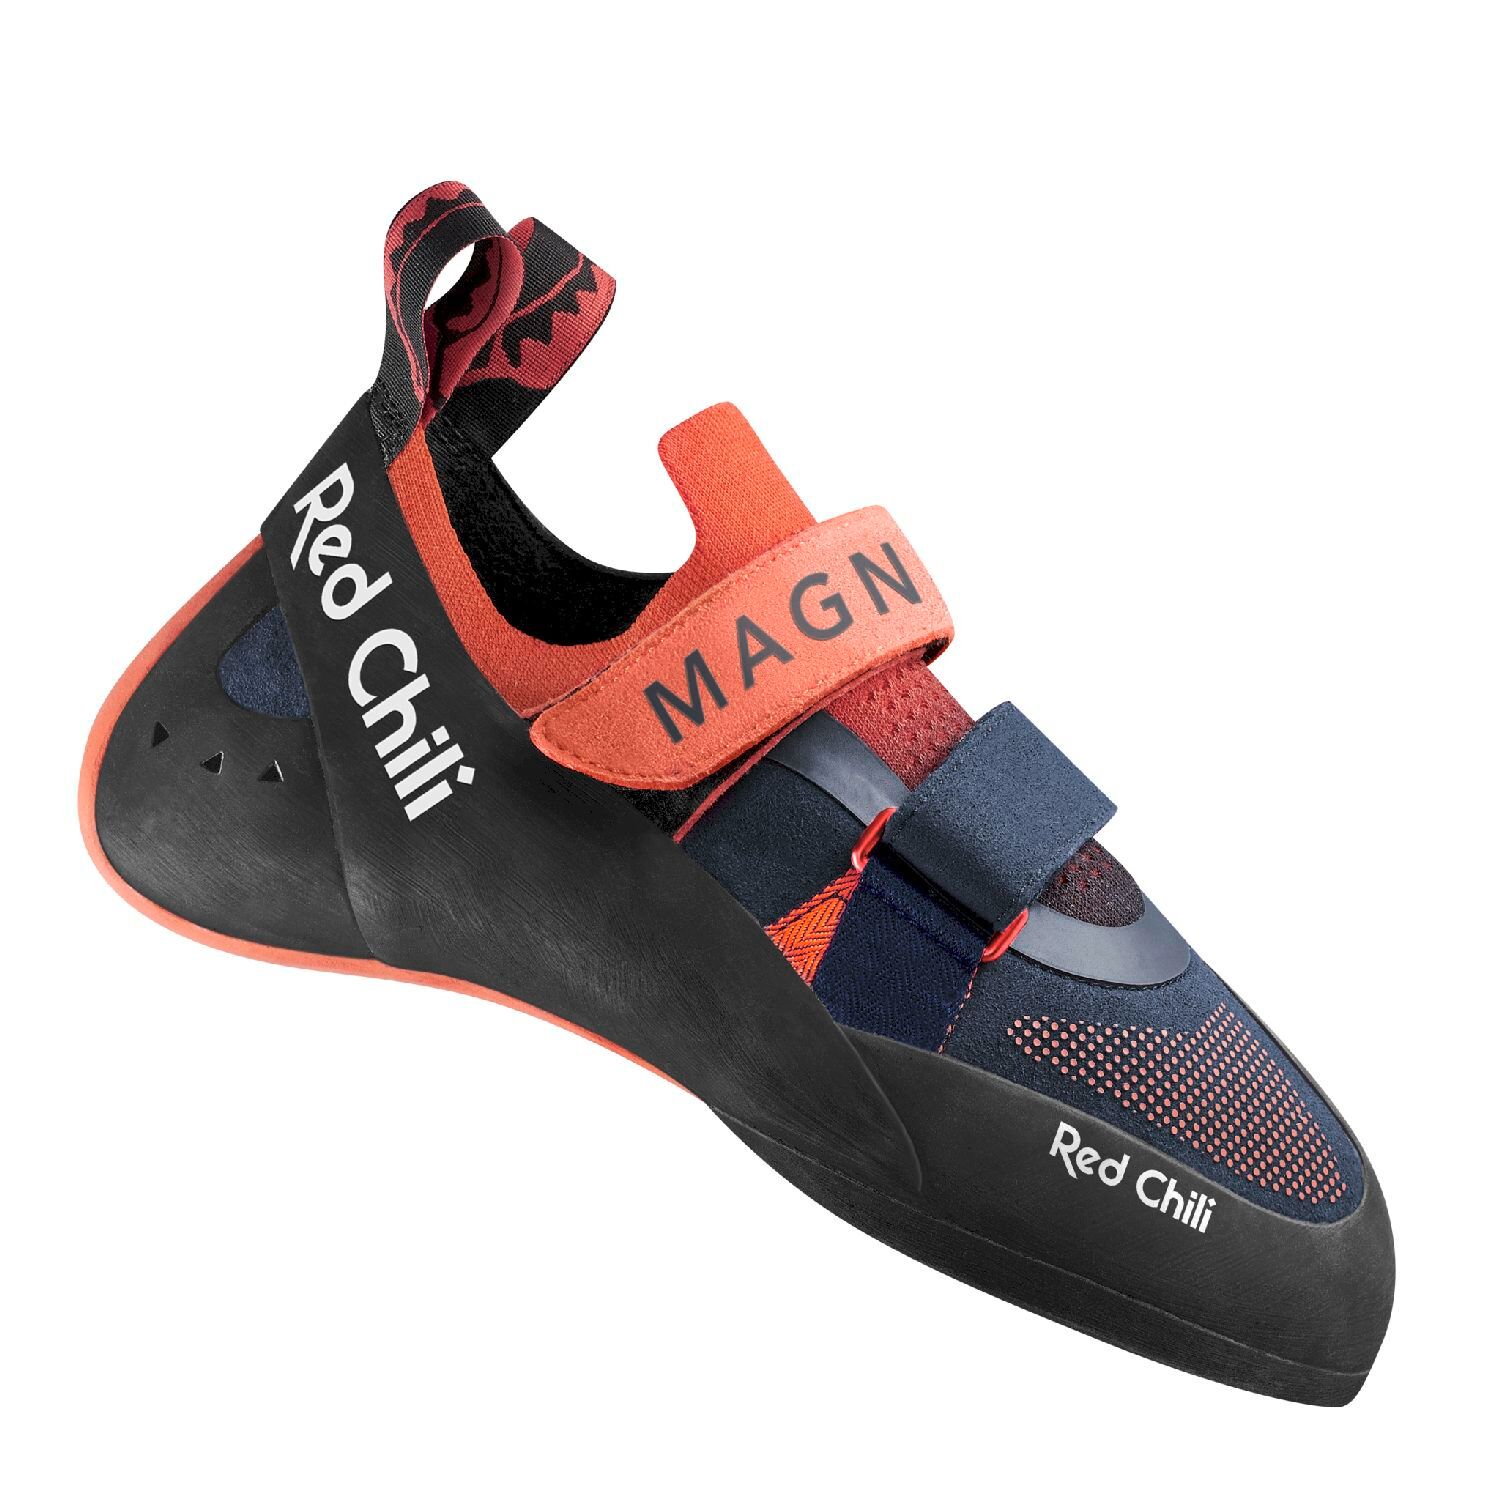 Red Chili Magnet - Climbing shoes